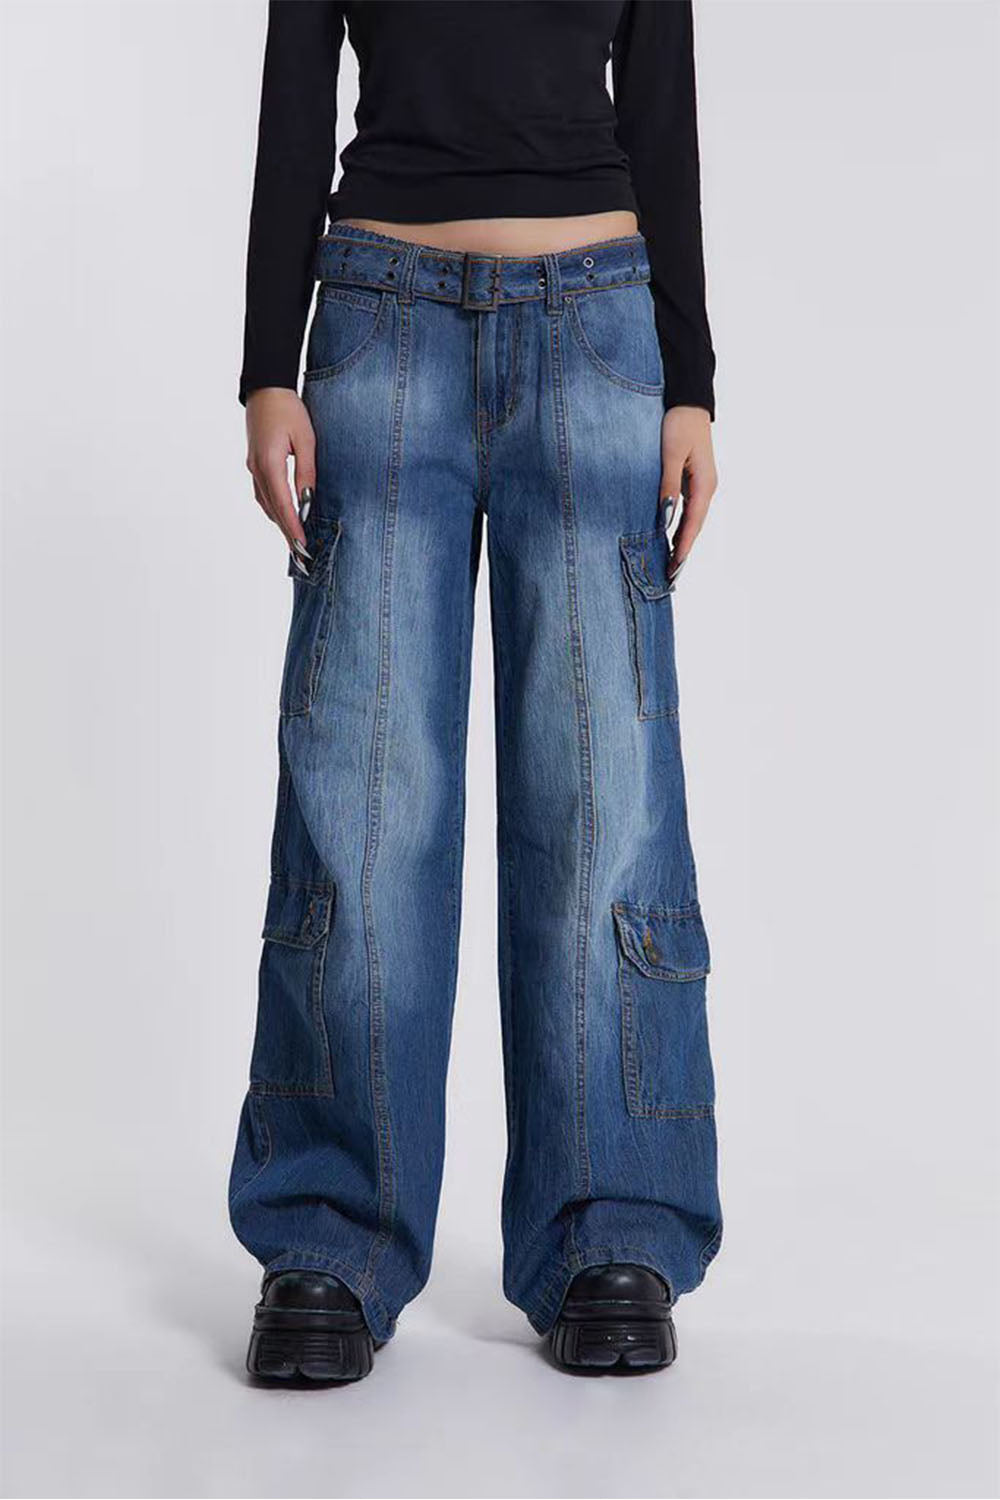 Button Fly Washed Jeans